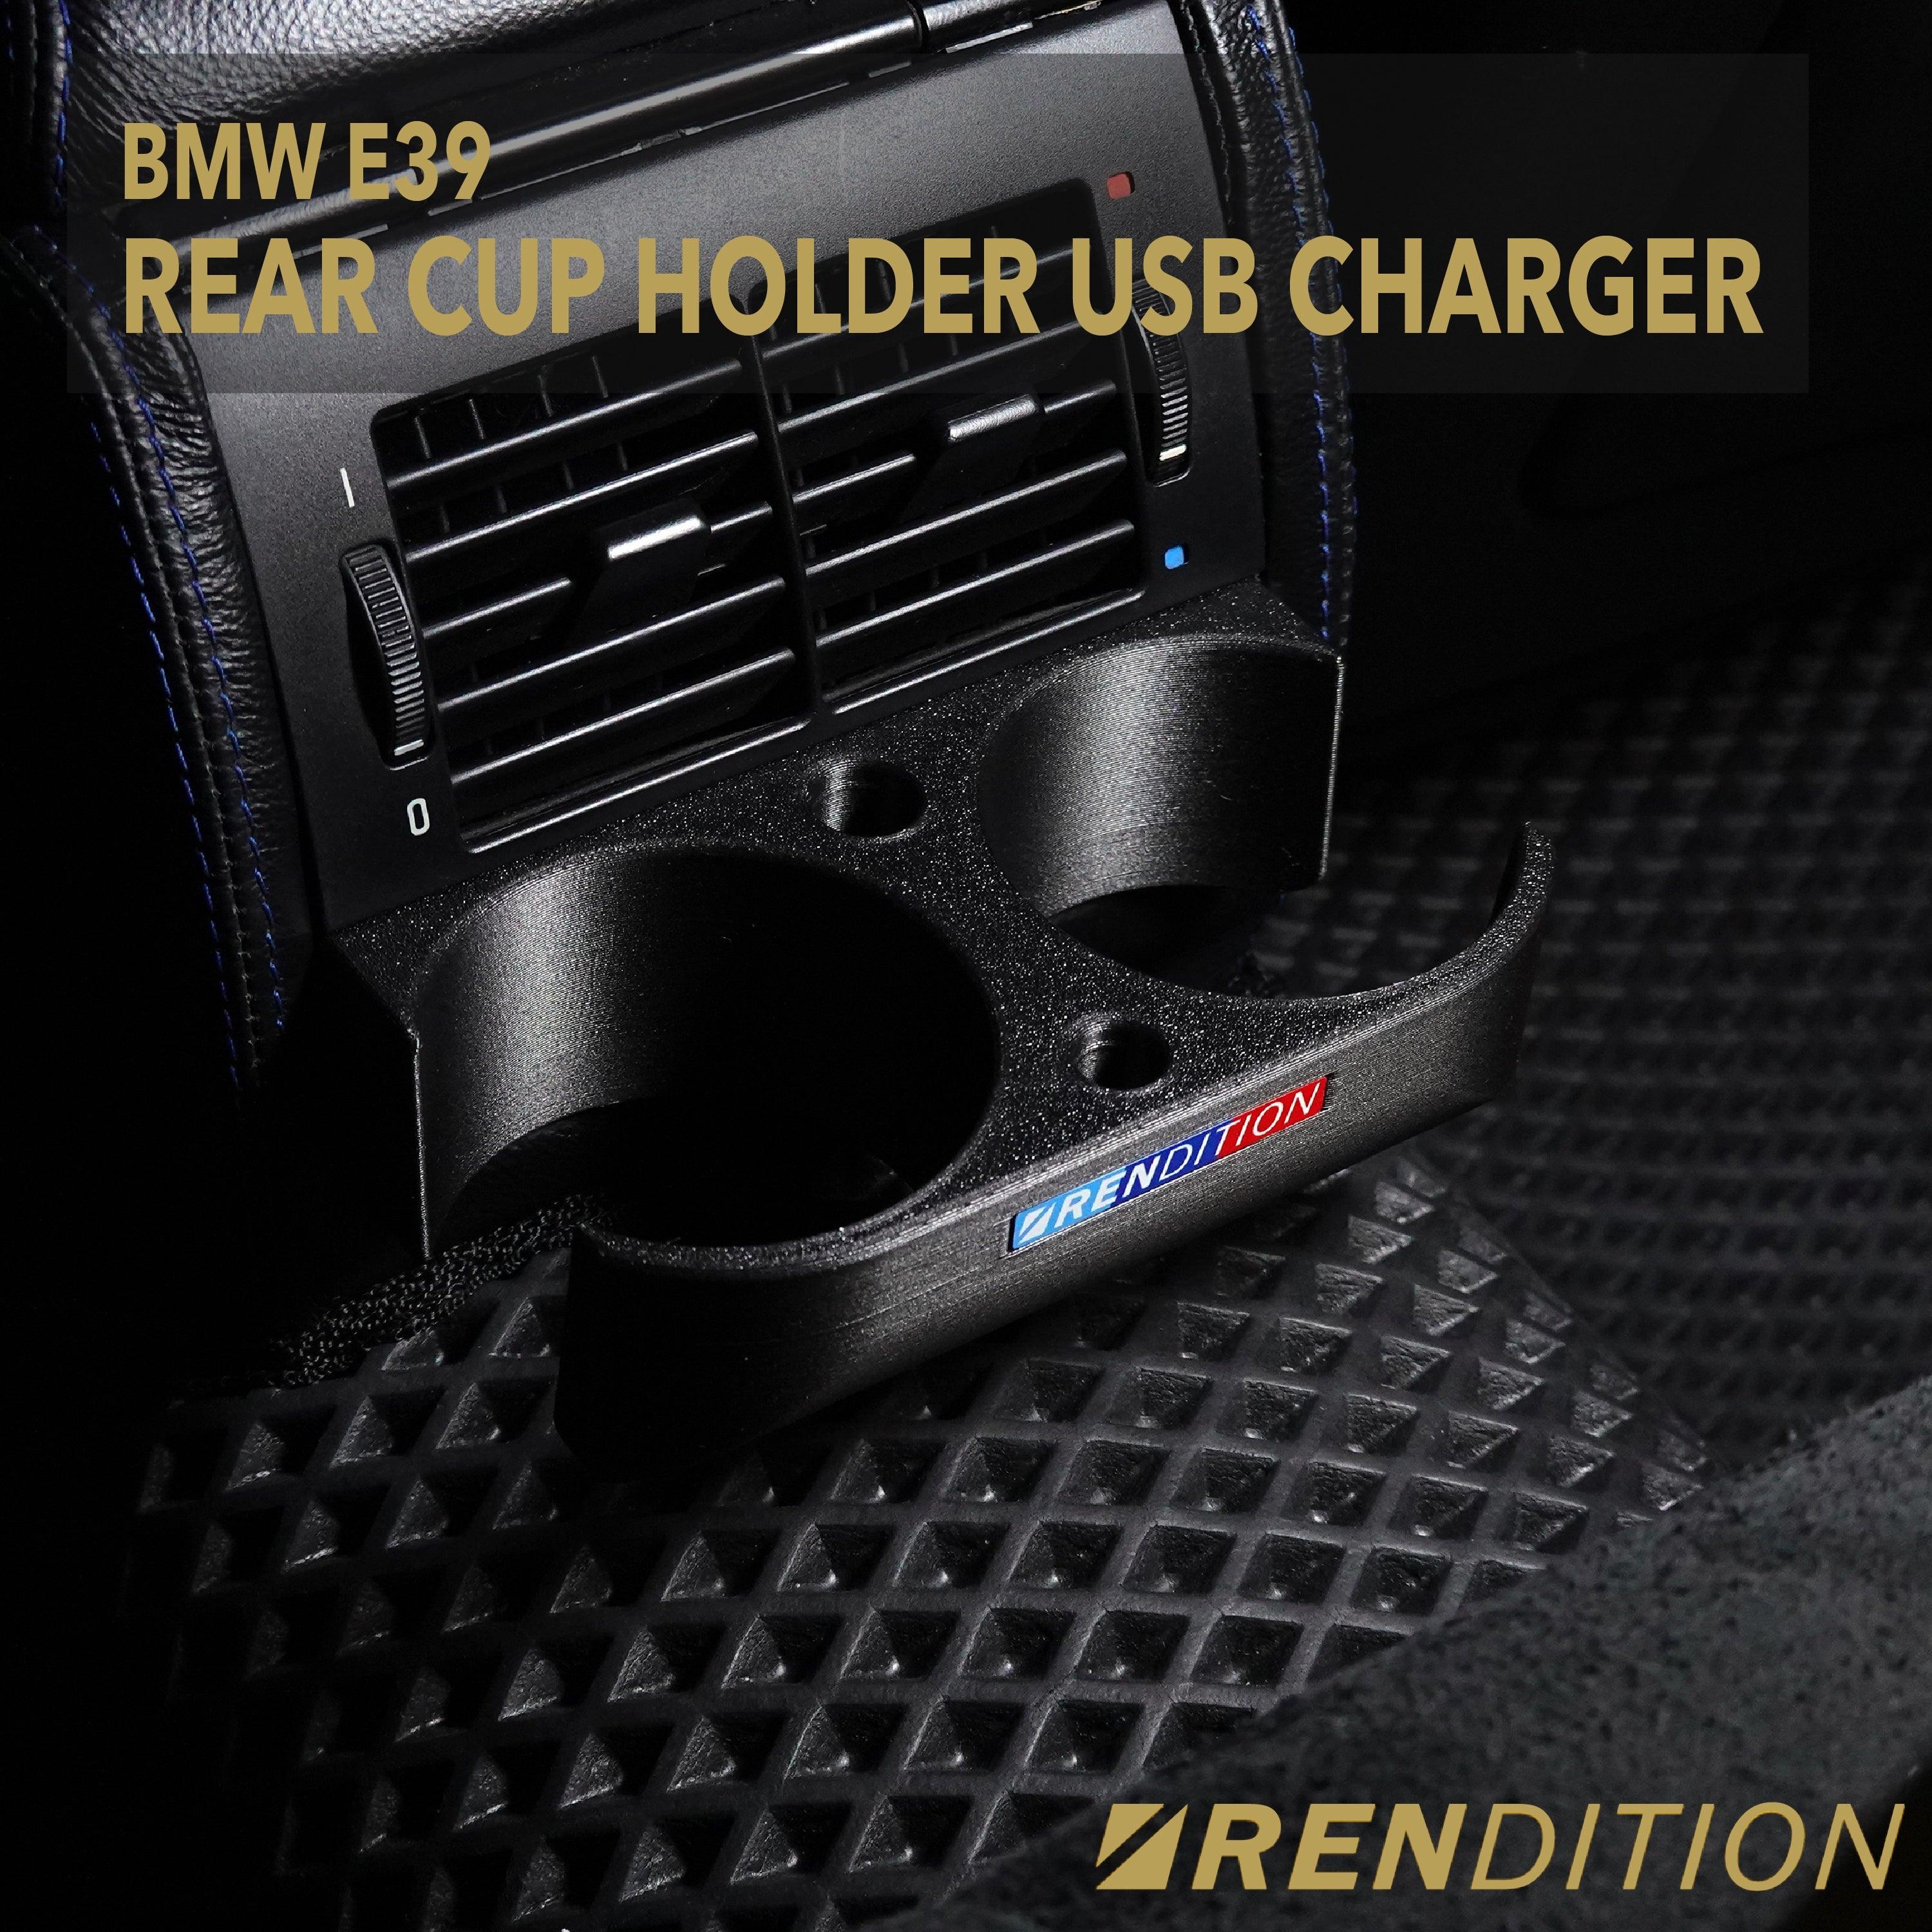 BMW E39 REAR CUP HOLDER USB CHARGER V1.8 - K2 Industries